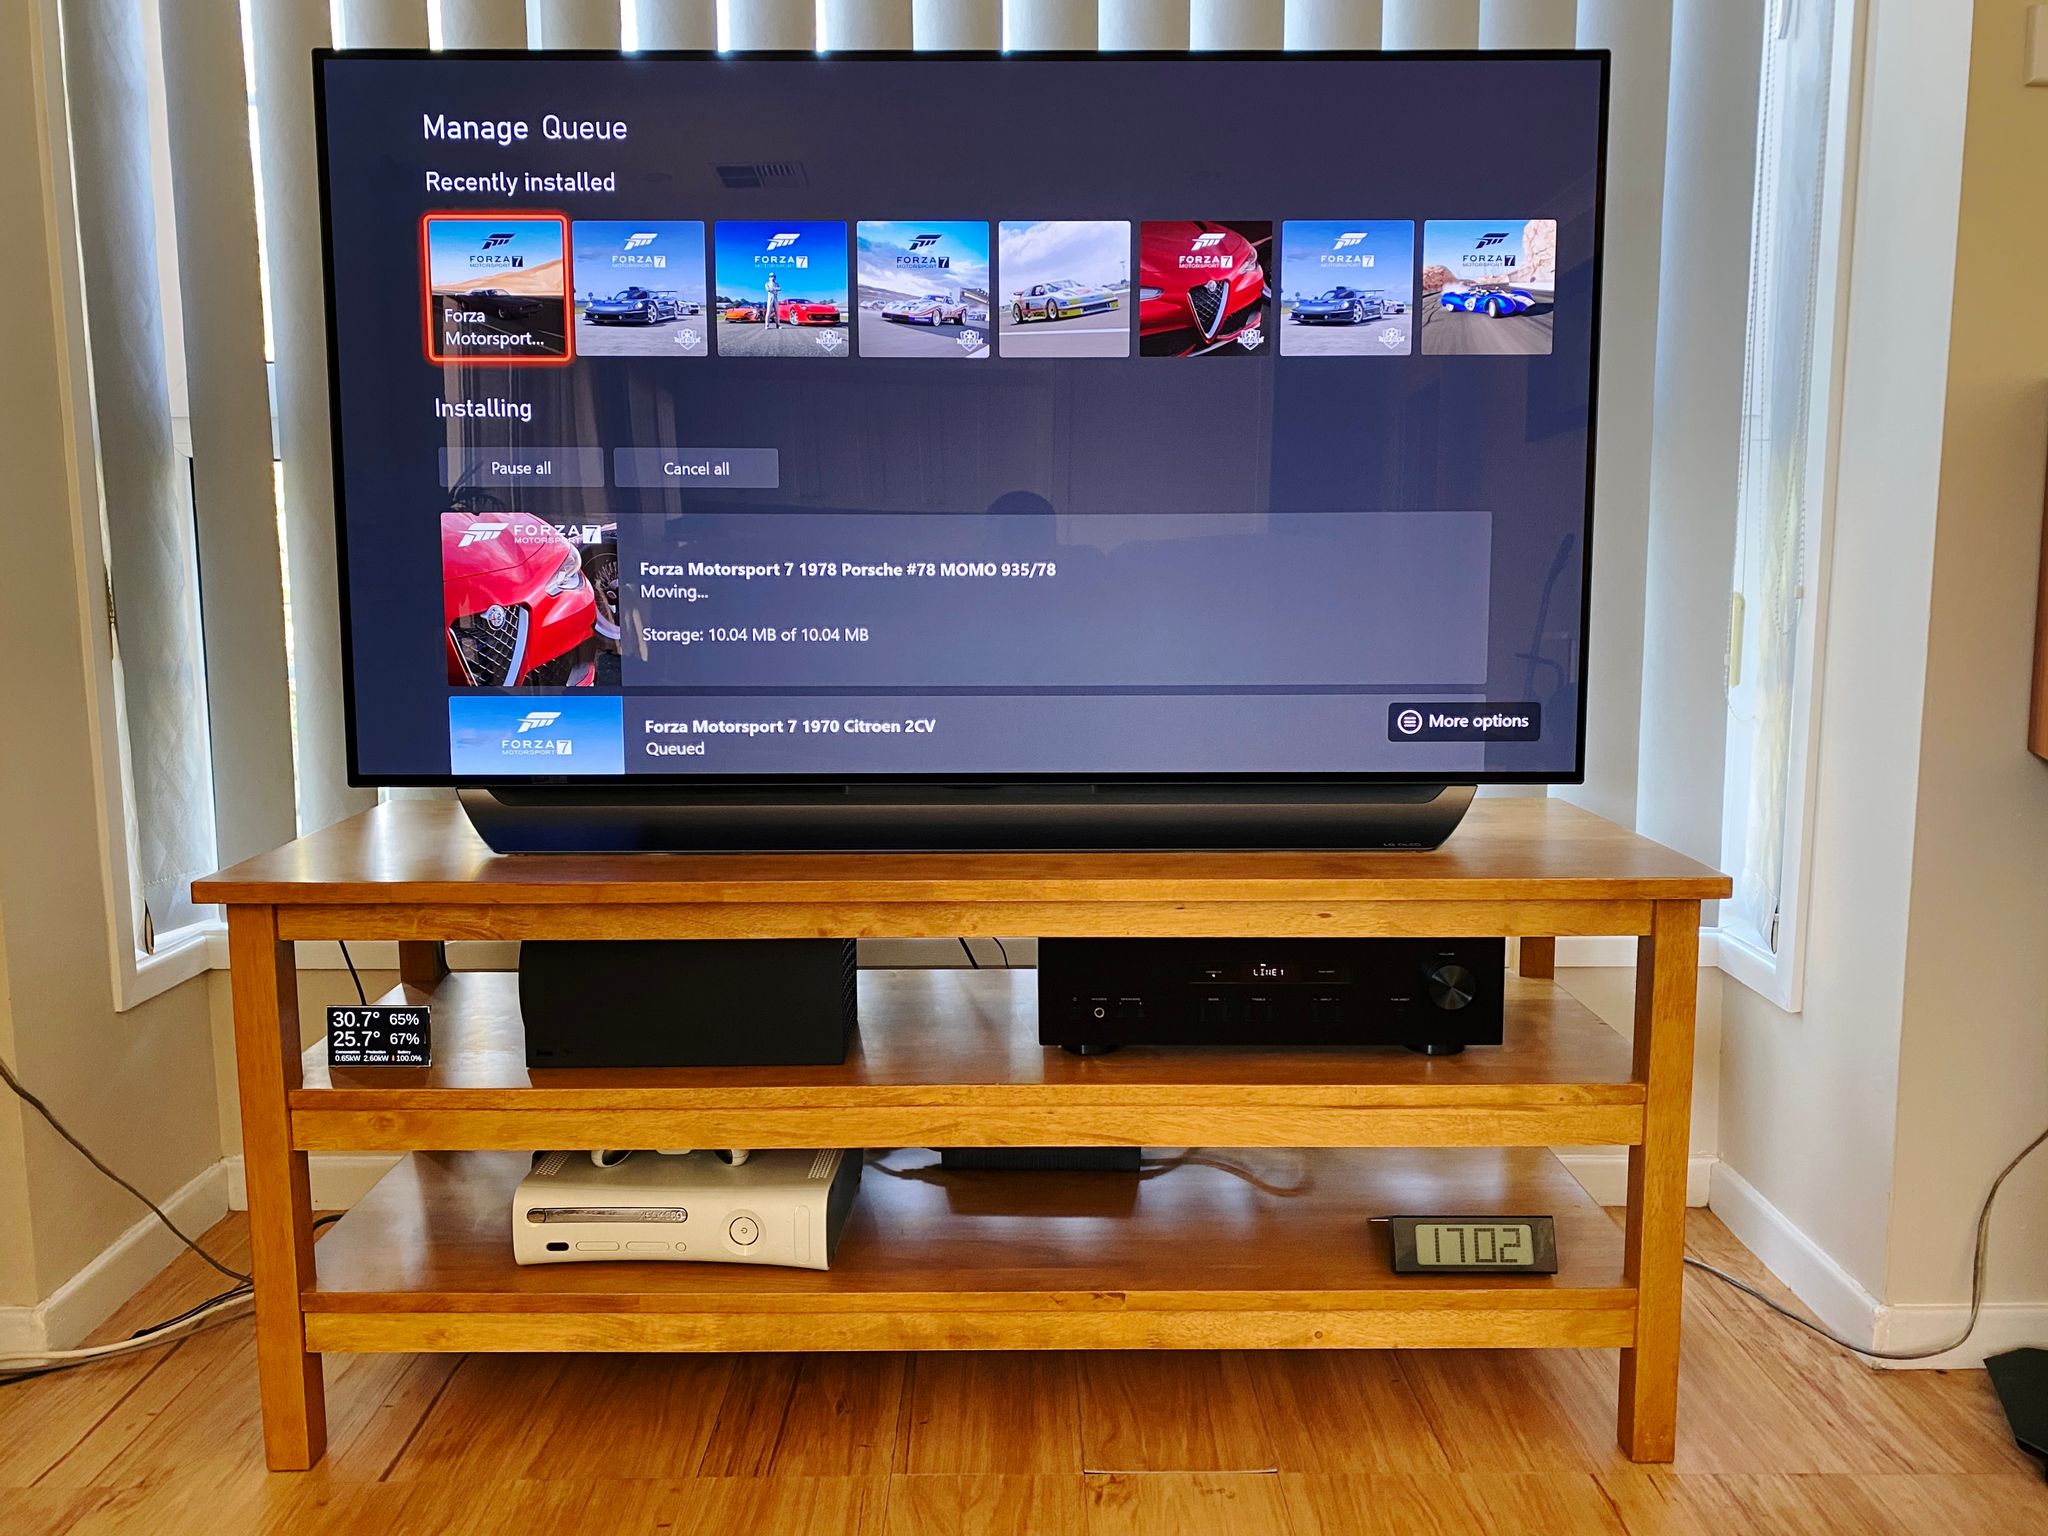 A photo of our TV setup. The TV stand is a two-shelf wooden one, the TV is sitting on top, on the shelf underneath is the Xbox Series X sitting on its side next to the stereo amplifier, and on the bottom shelf is an Xbox 360.